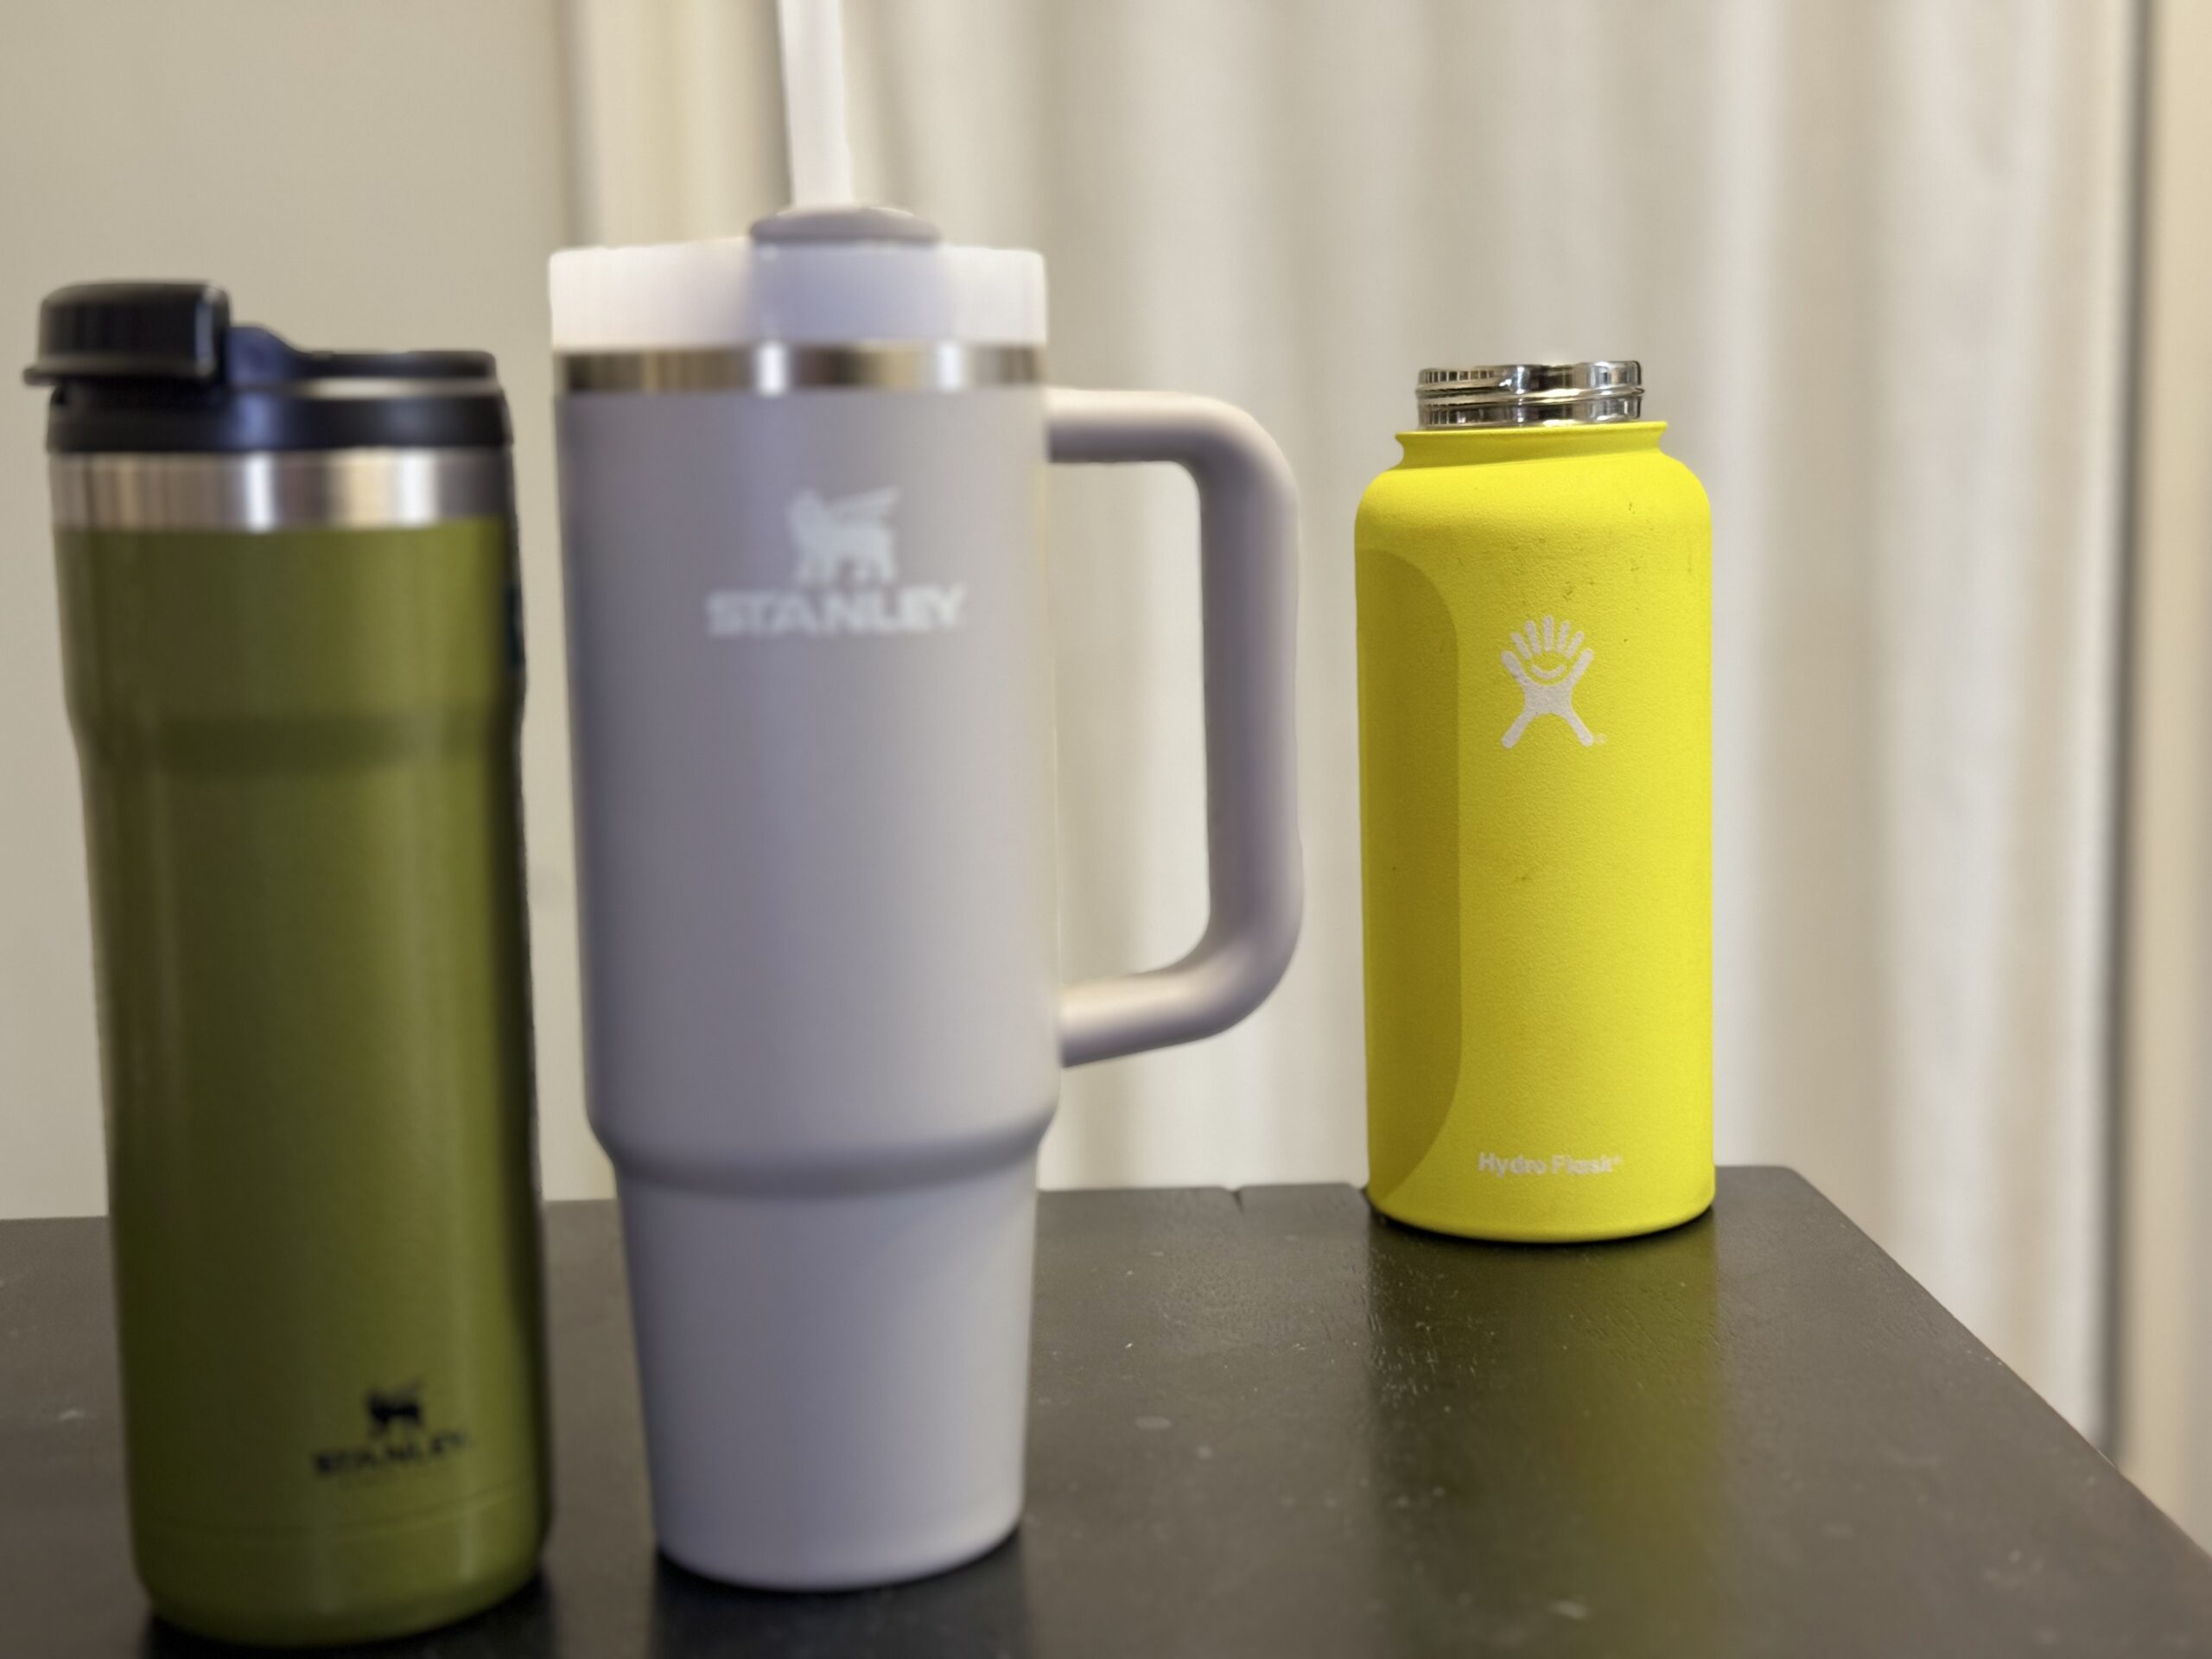 OPINION: Stanleys are the new Hydroflask